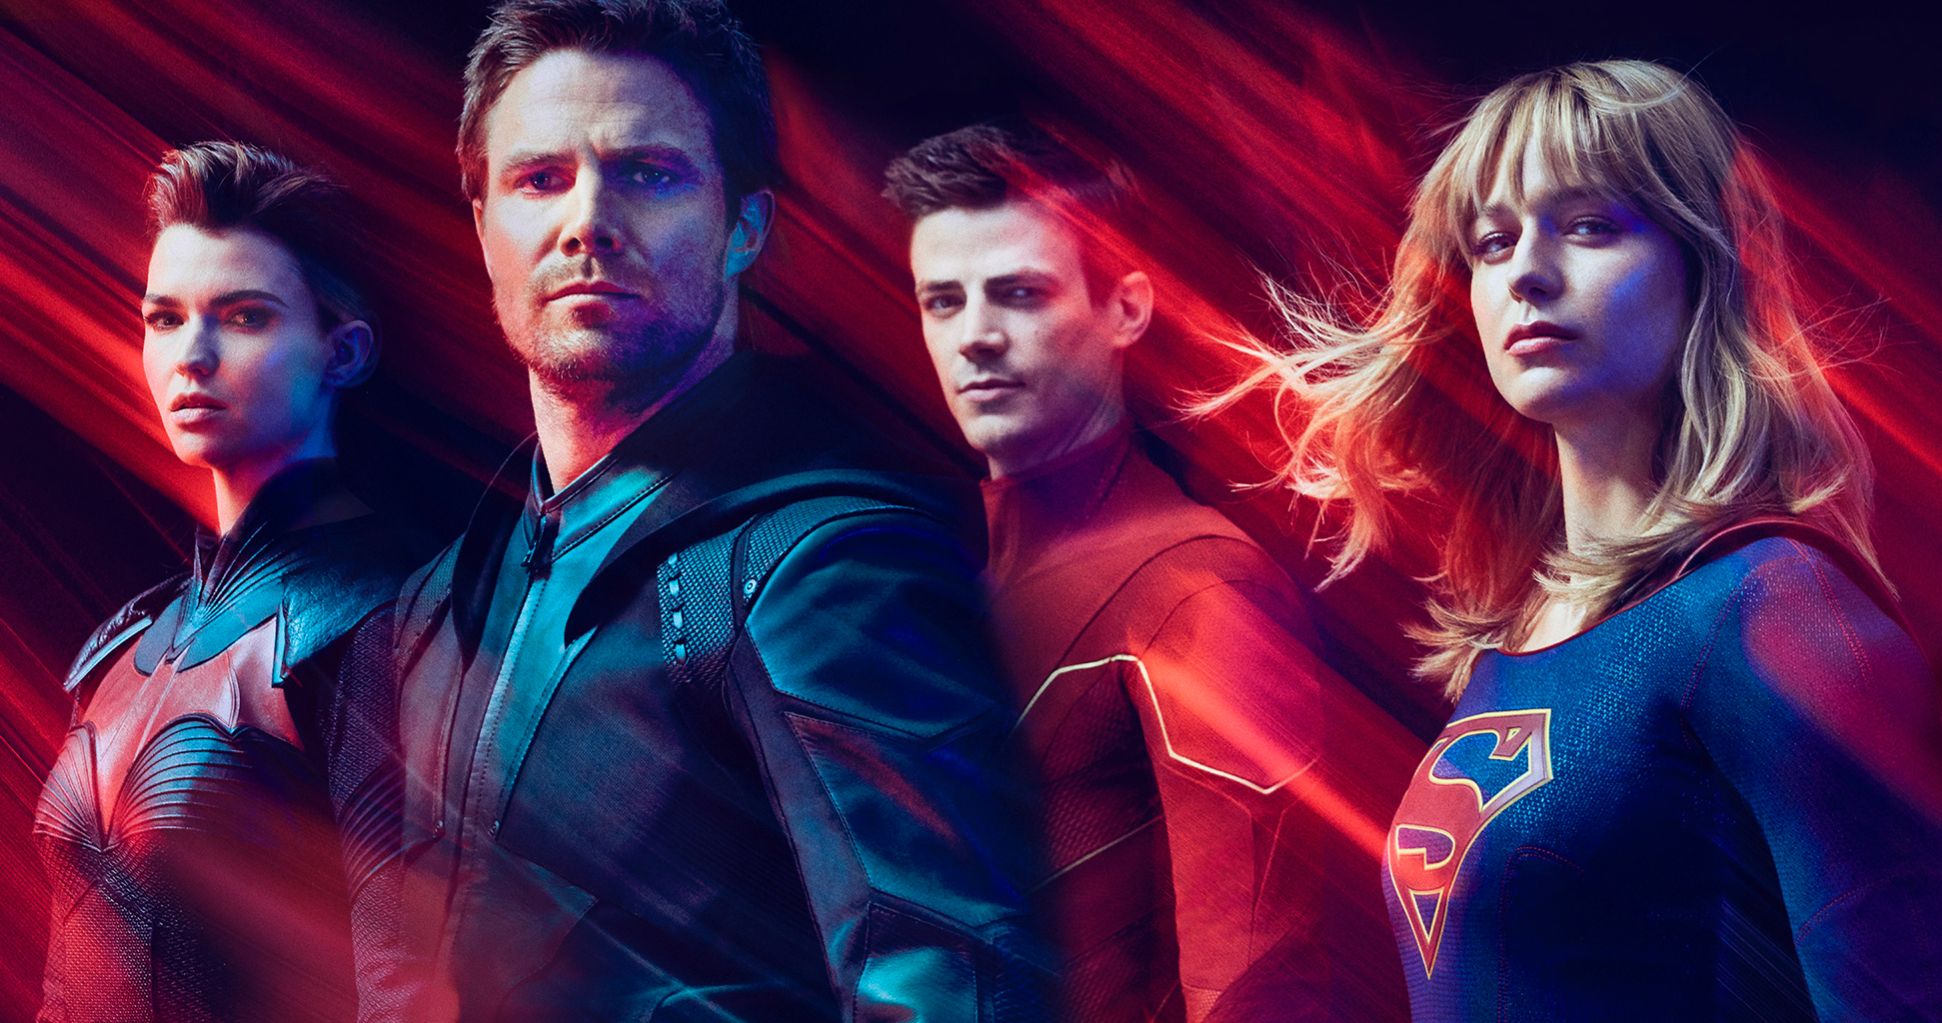 ArrowVerse Crossover Crisis on Infinite Earths Premiere Dates Announced